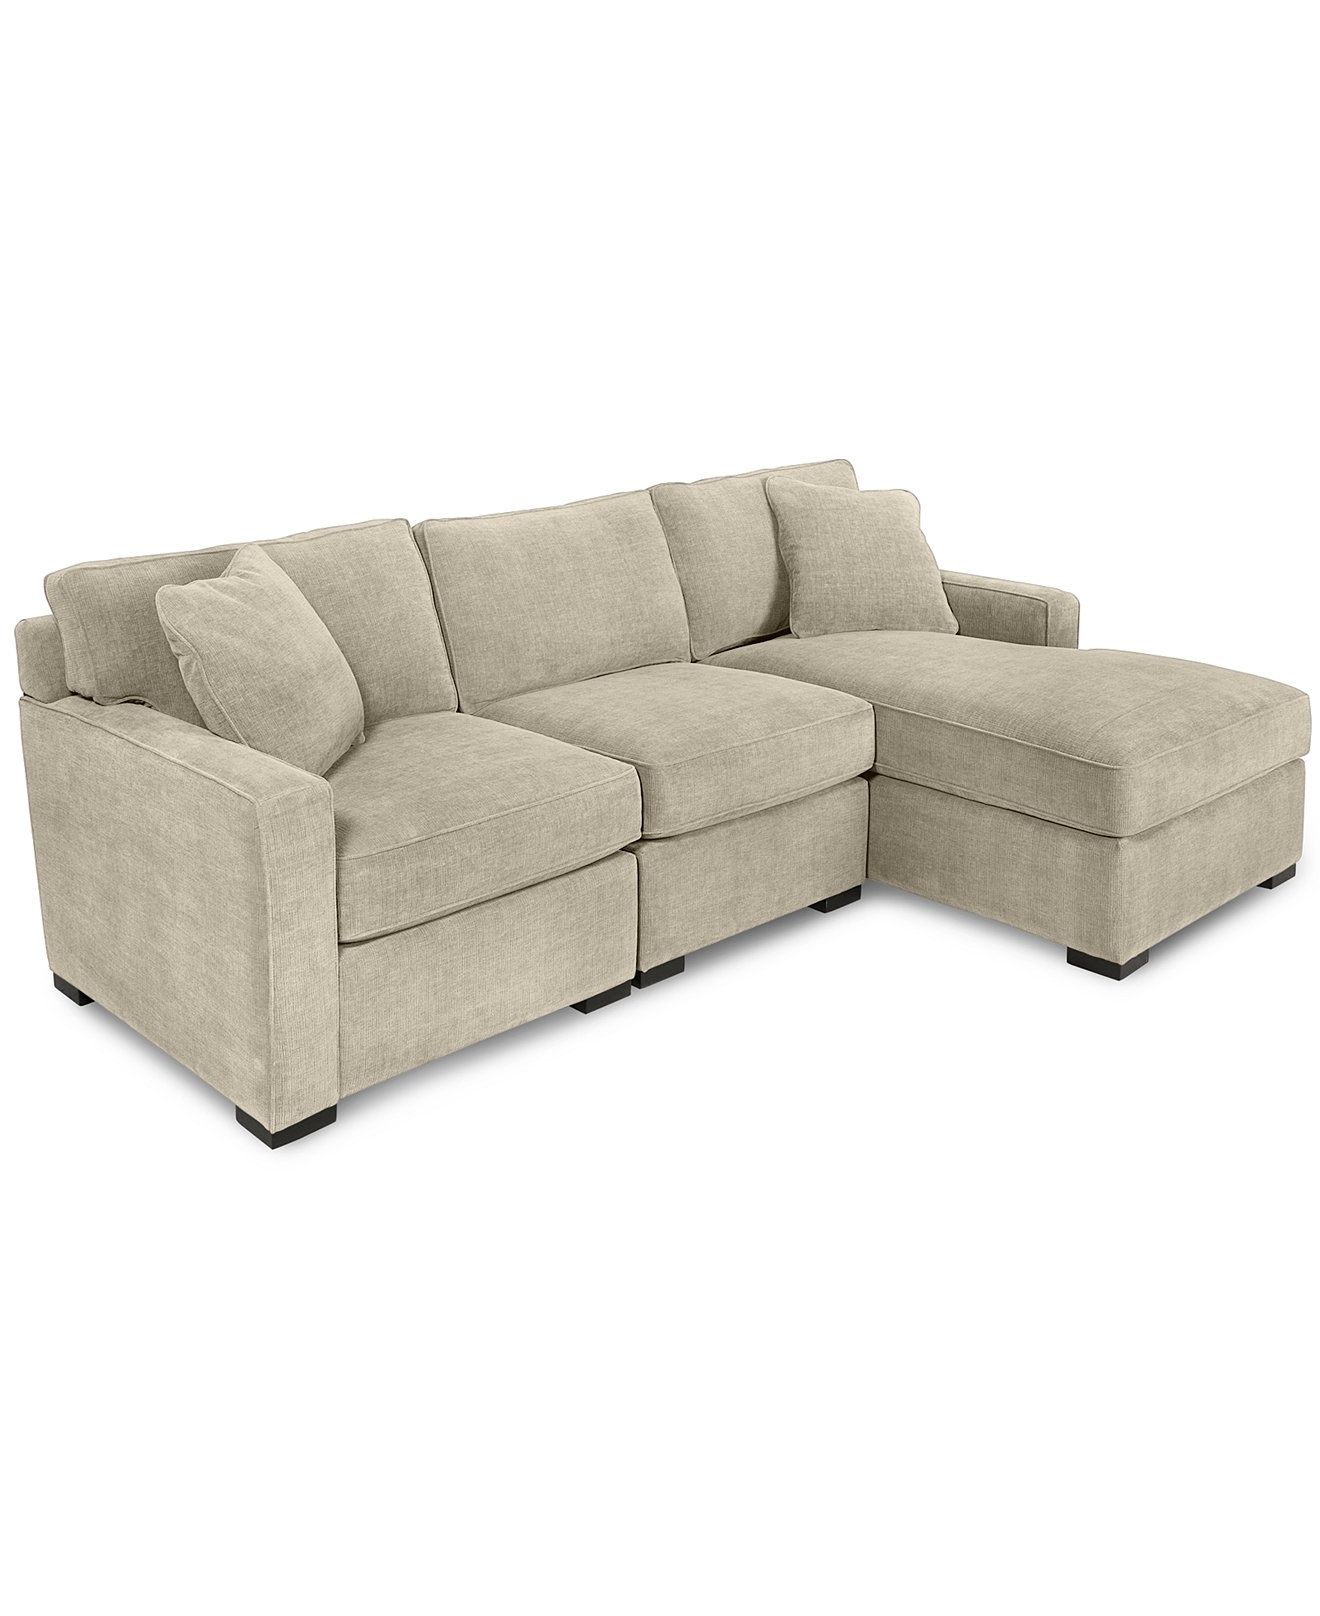 Radley 3 Piece Fabric Chaise Sectional Sofa, Created For Macy's Intended For Kelowna Sectional Sofas (Photo 7 of 10)